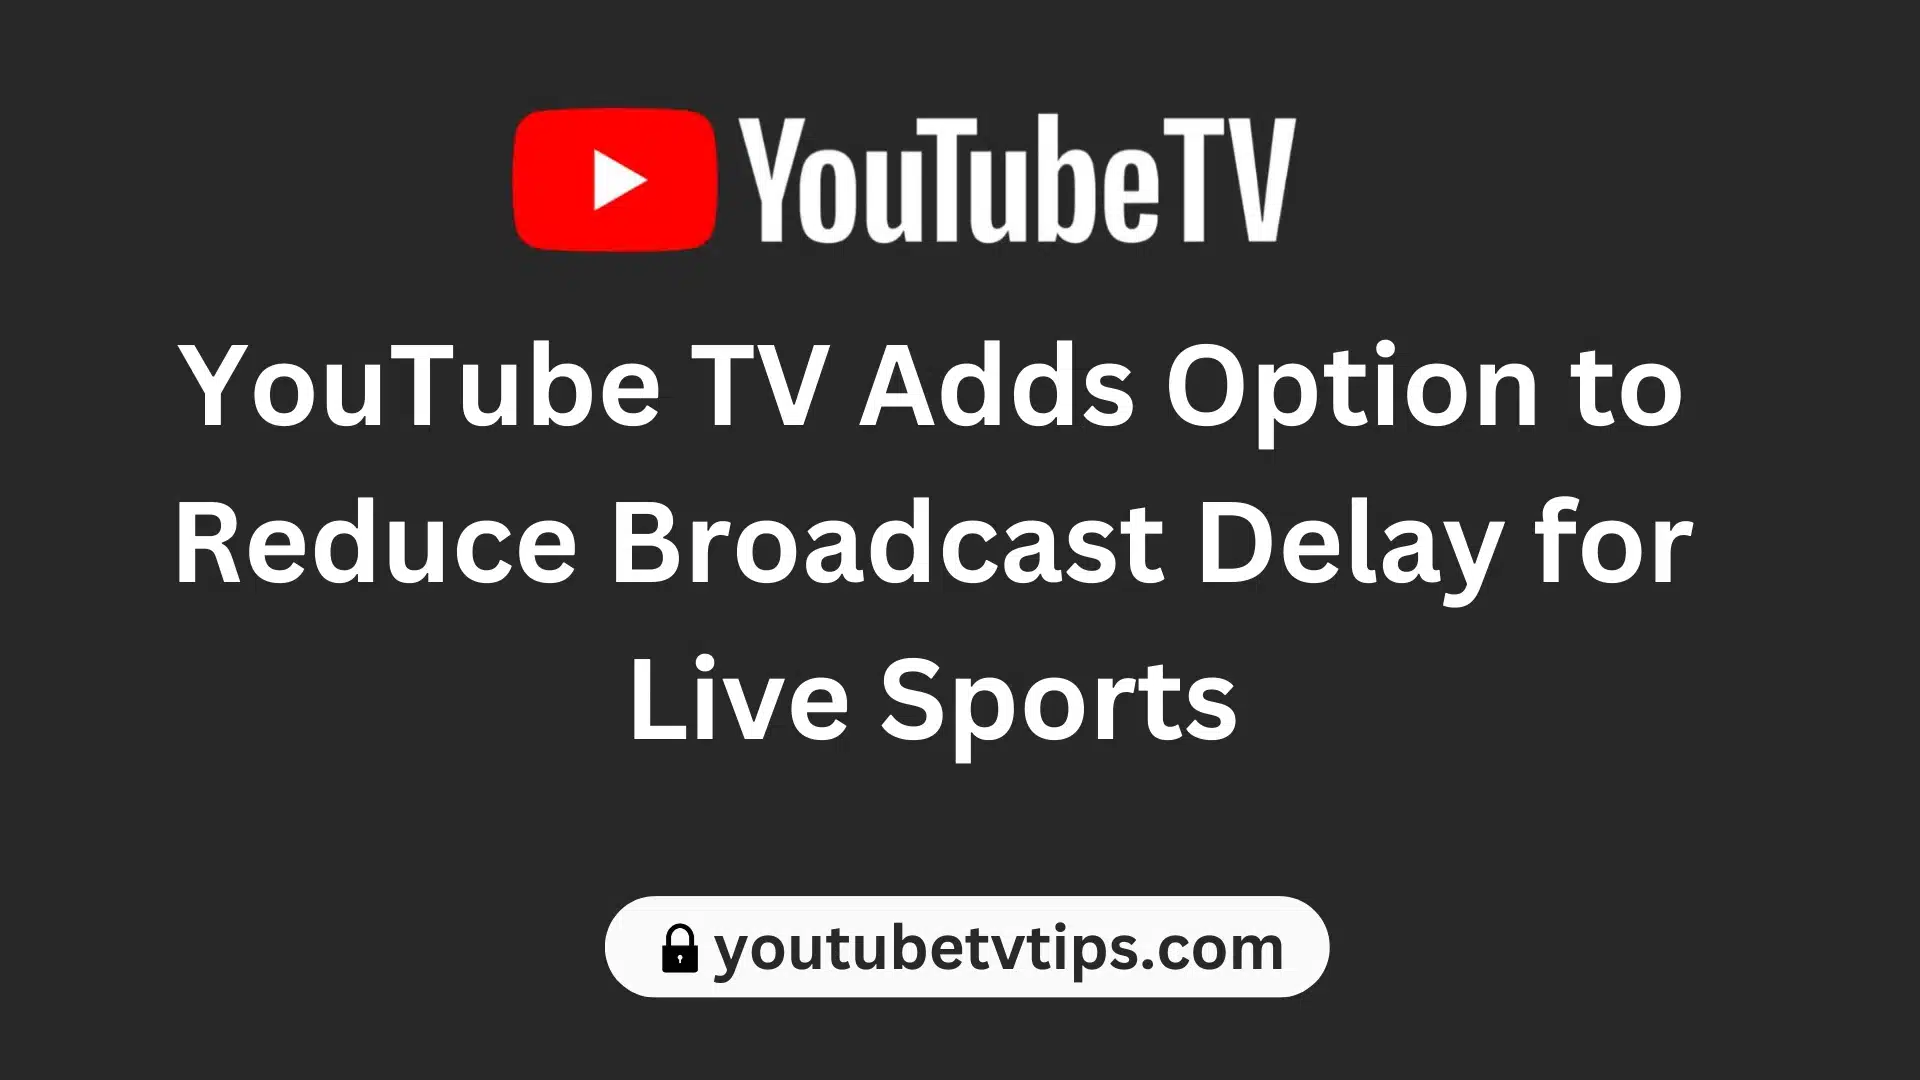 YouTube TV Adds Option to Reduce Broadcast Delay for Live Sports